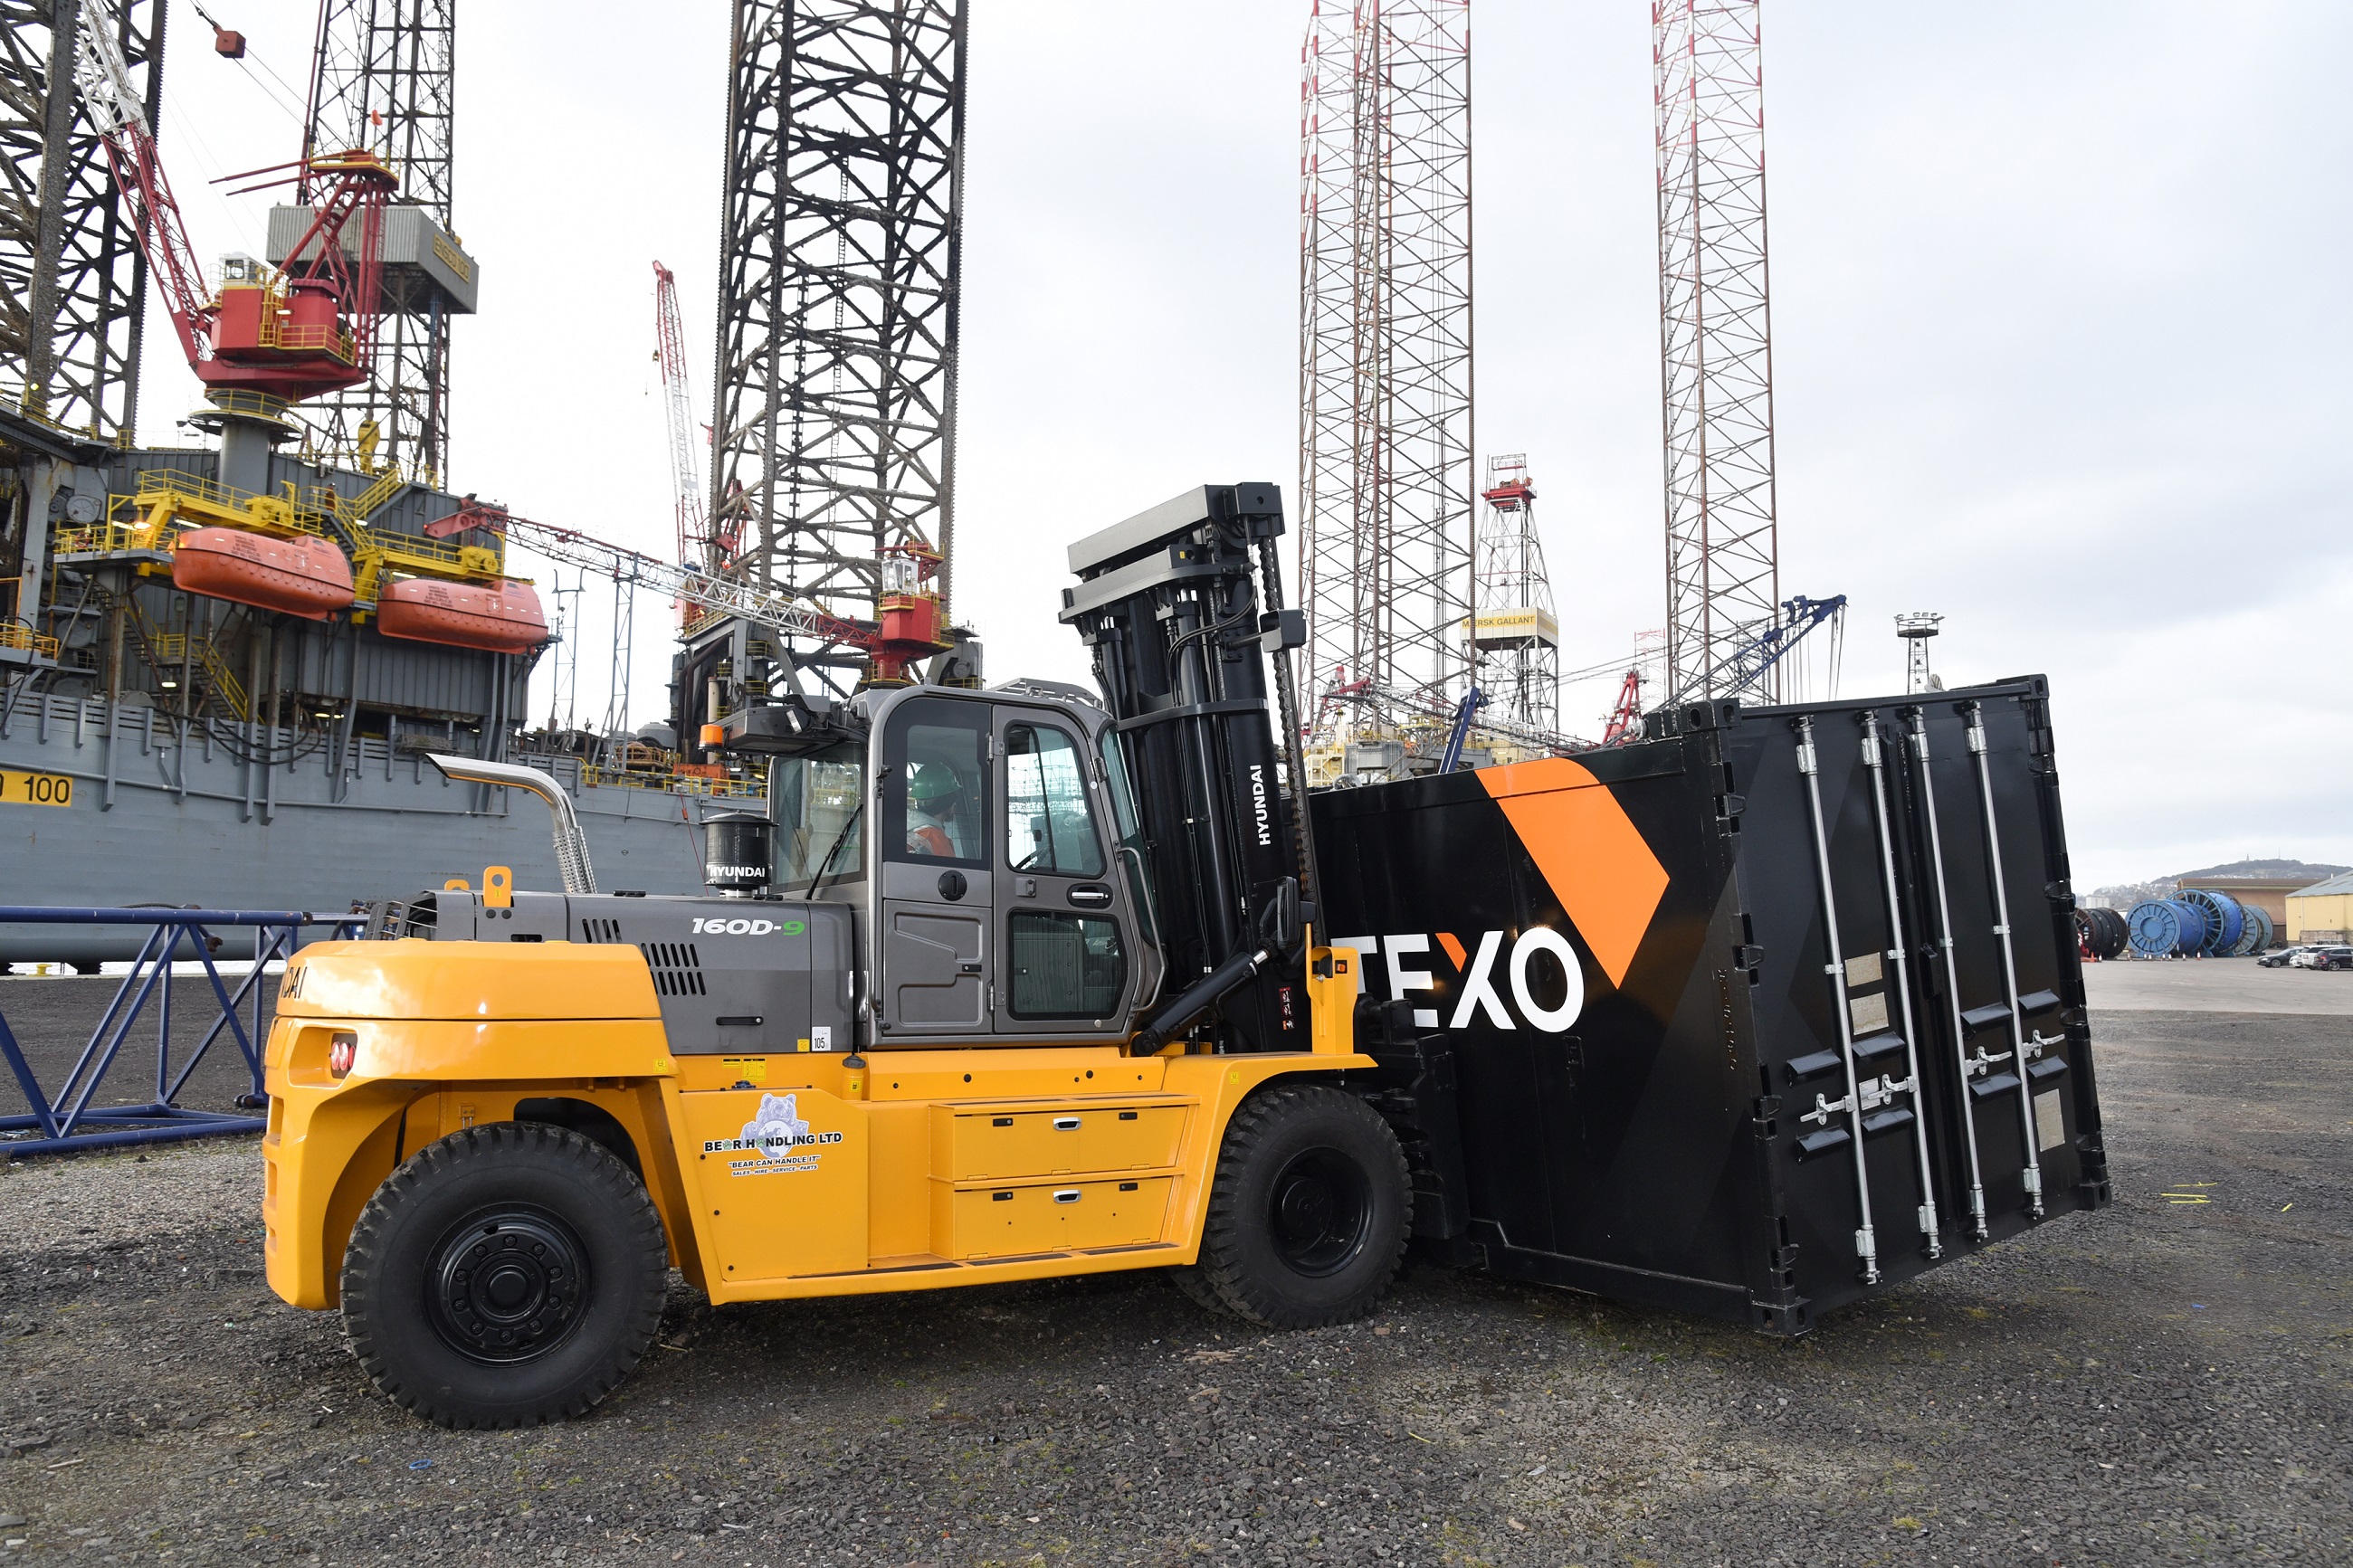 Bear Handling Sign Deal With Engineering Giant Texo Through Forklift Supply Cea Construction Equipment Association